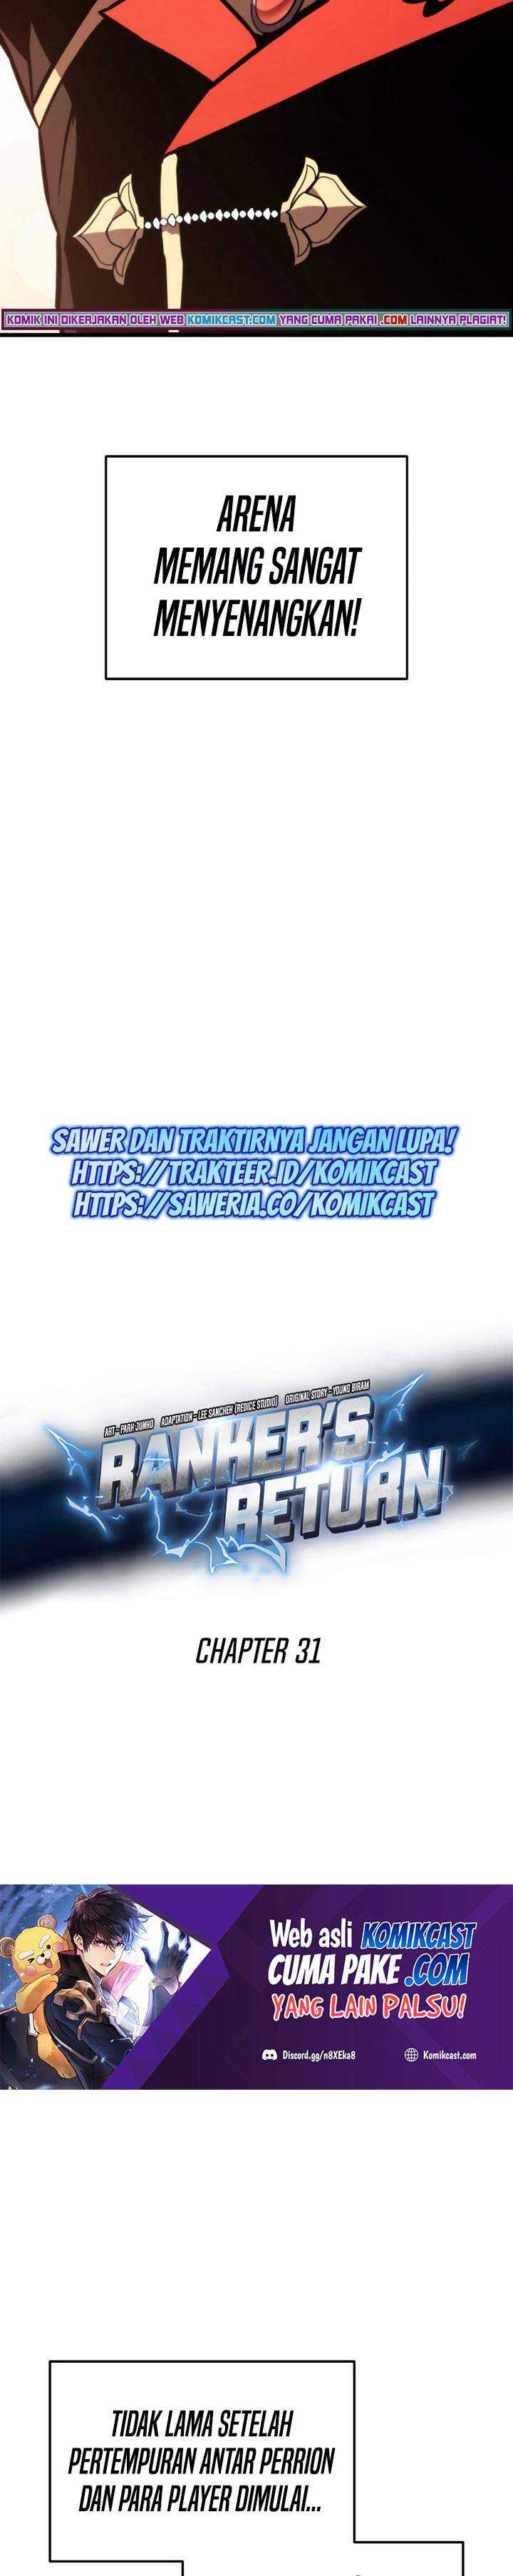 rankers-return-remake Chapter chapter-31